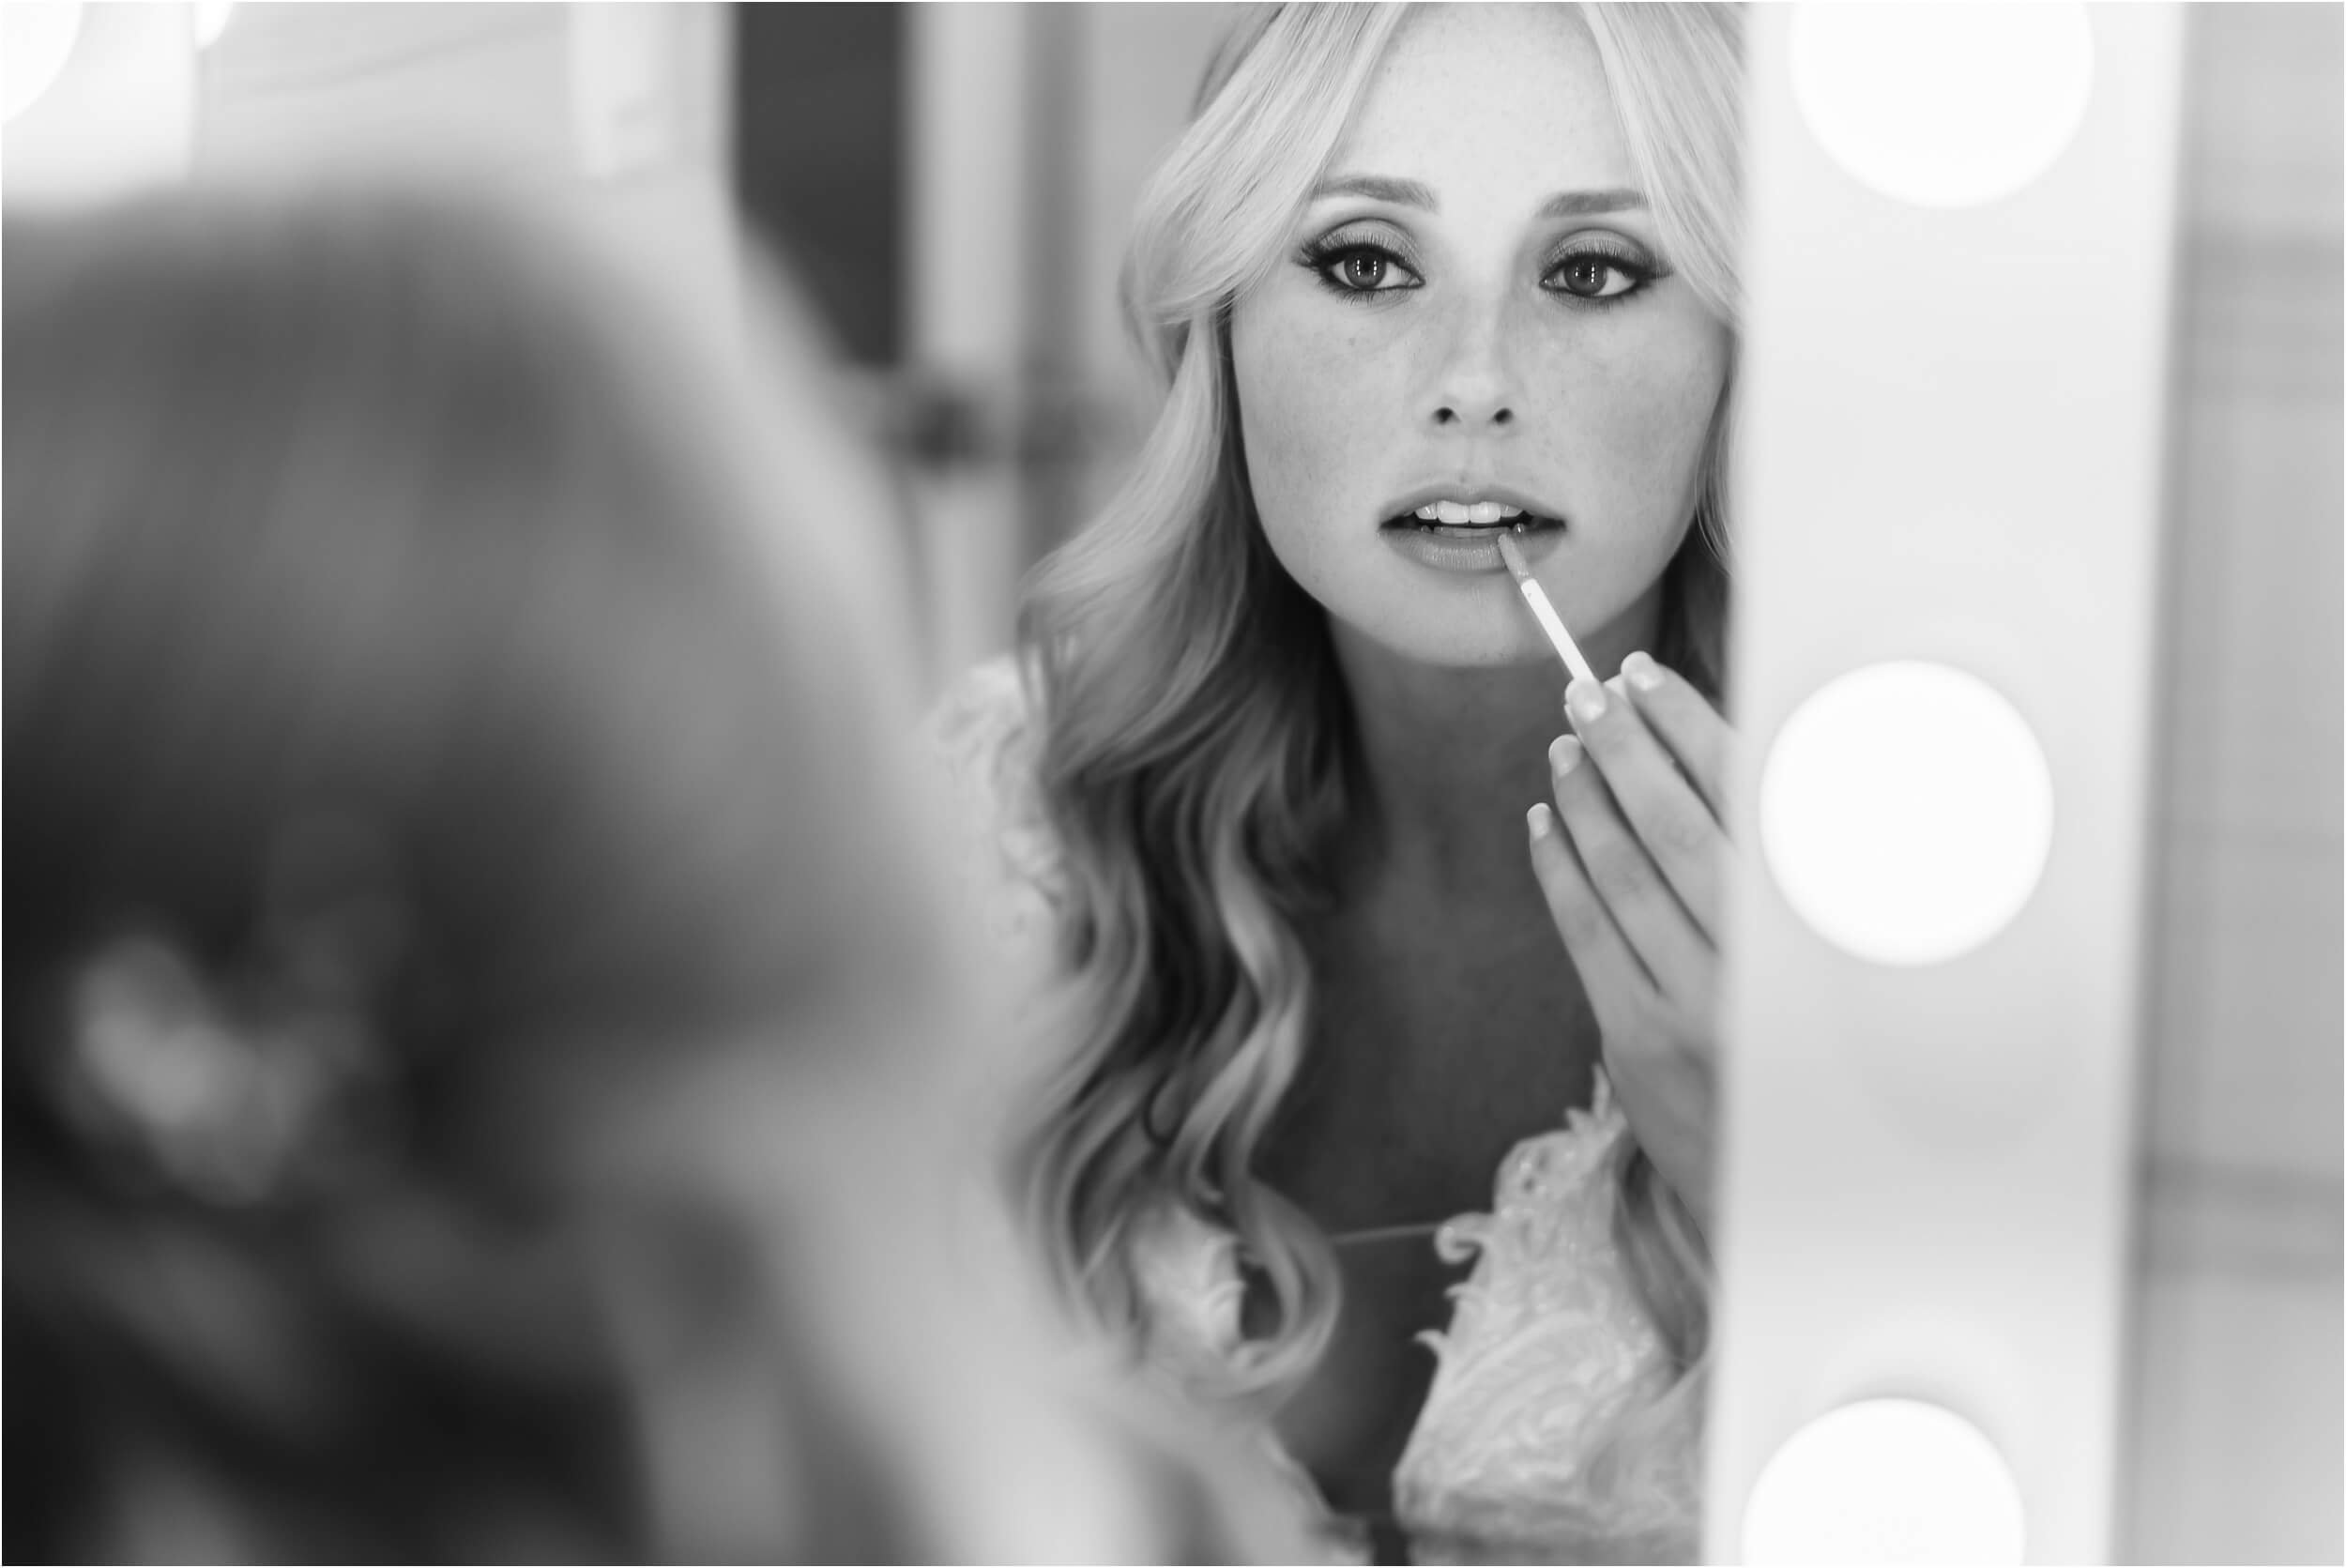  A beautiful bride applies her lipstick in a lighted mirror in the bathroom of her hotel.  